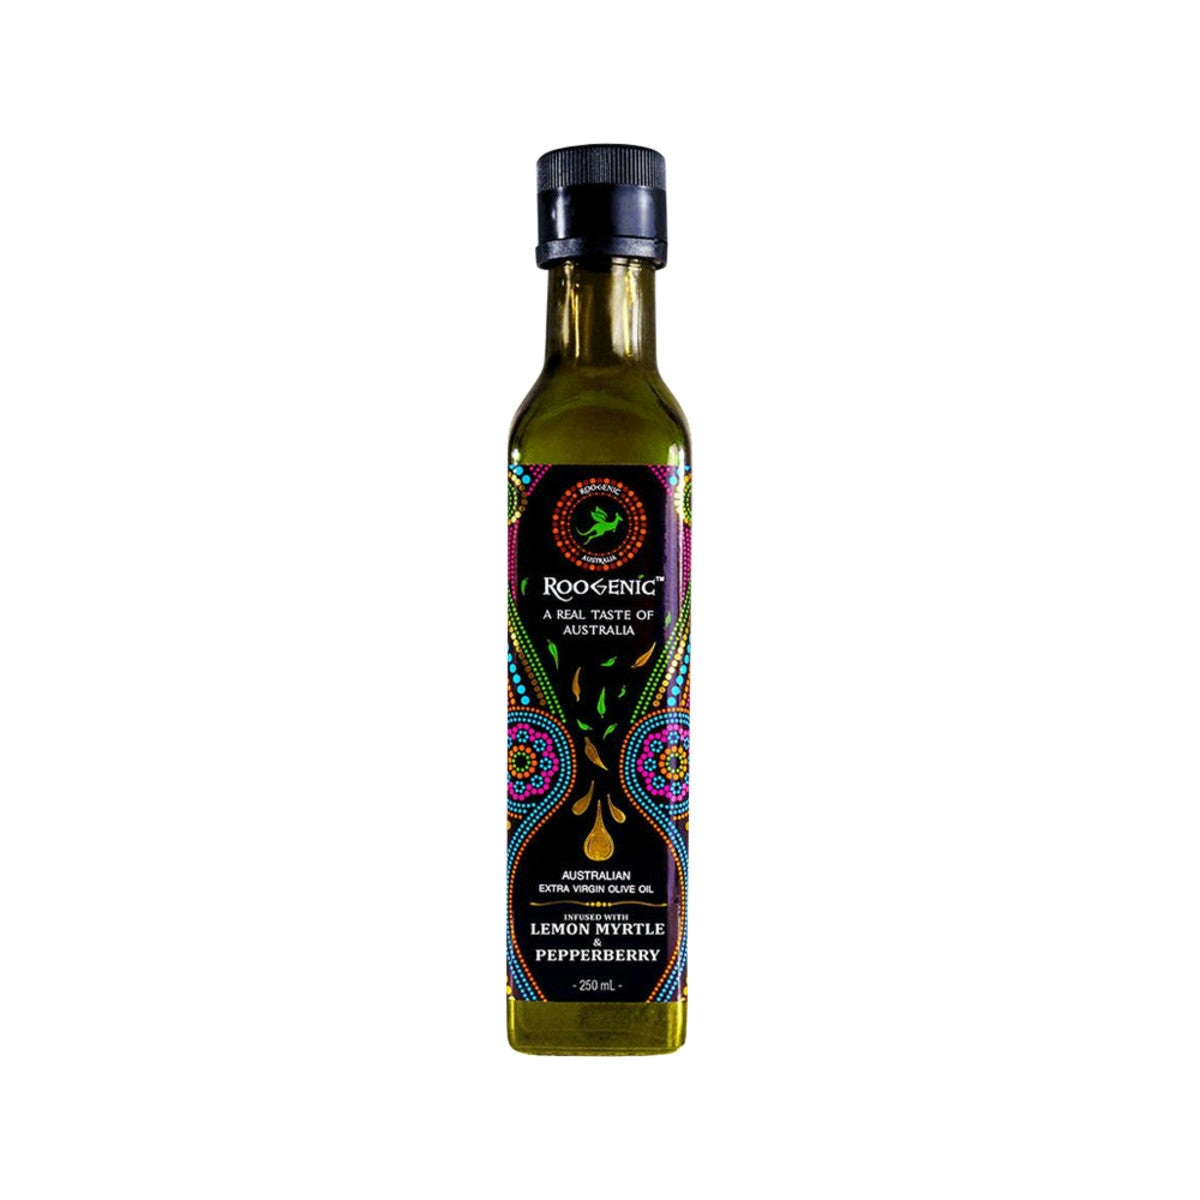 image of Roogenic Australia Australian Extra Virgin Olive Oil Infused With lemon Myrtle & Pepperberry 250ml with white background 